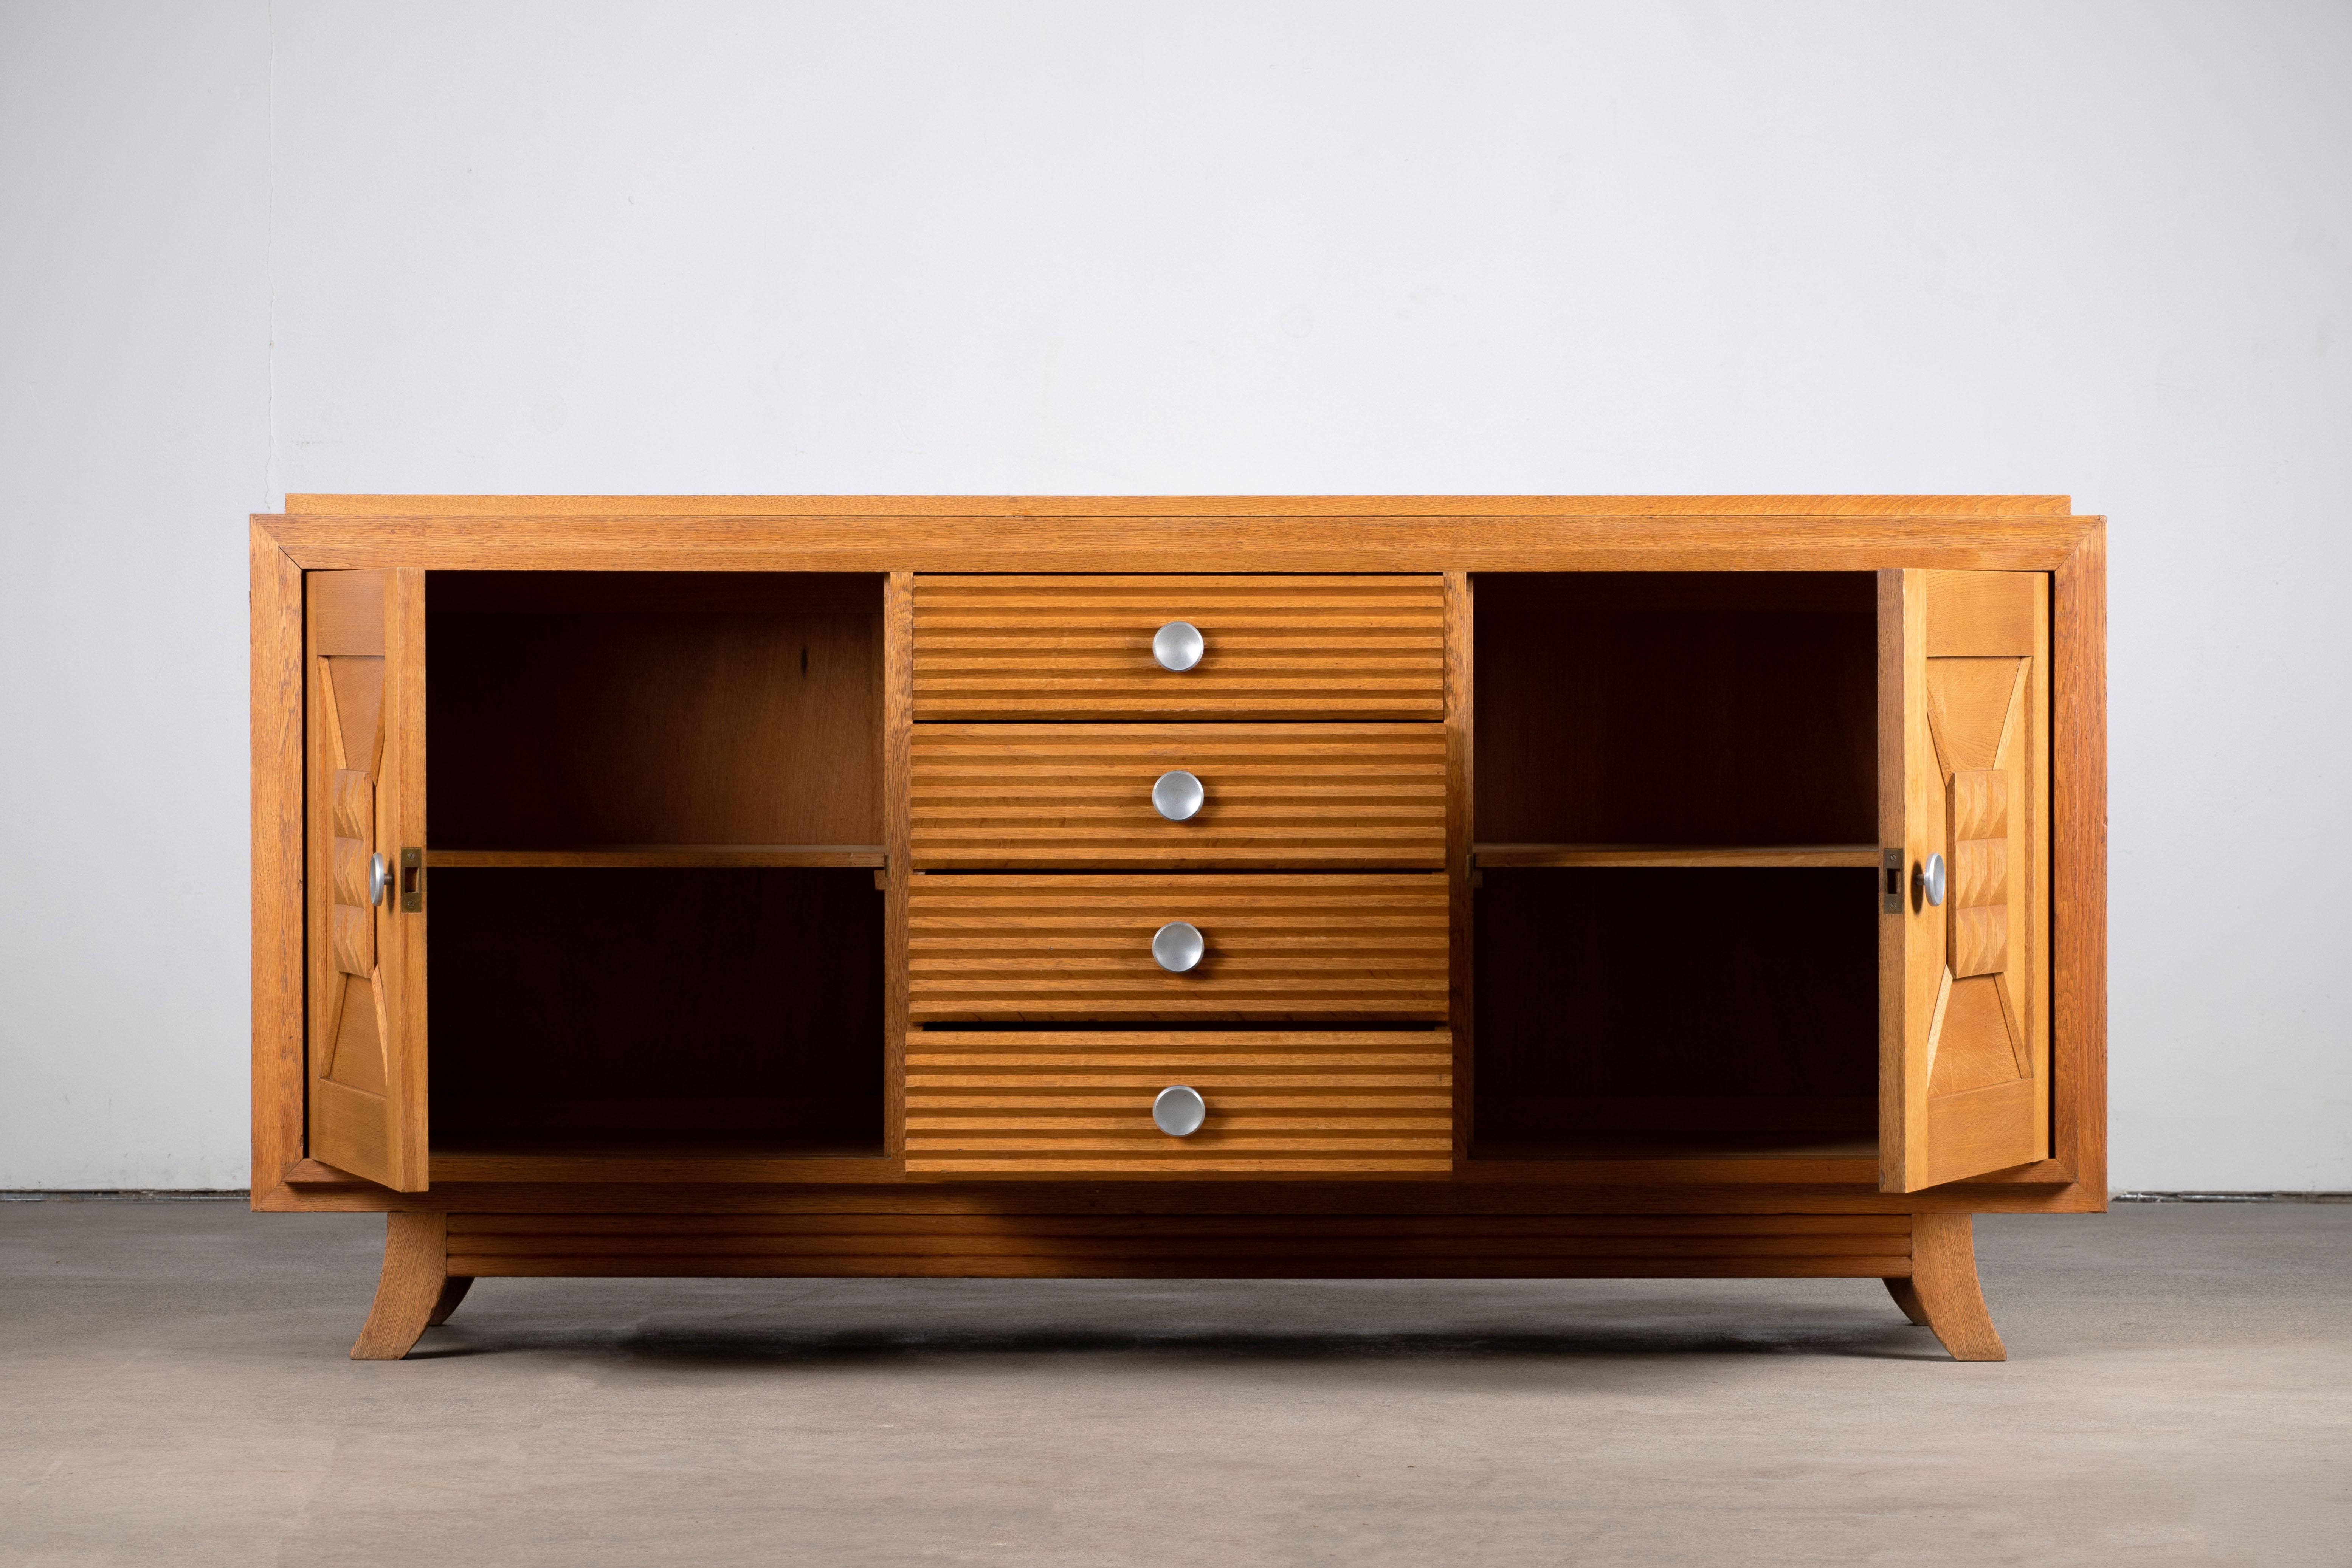 Sideboard, oak, France, 1940s
Consists of four central drawers and two storage compartments. 
The sideboard is in excellent original condition, with minor wear consistent with age and use.
A truly incredible piece in the manner of Jean Royère and